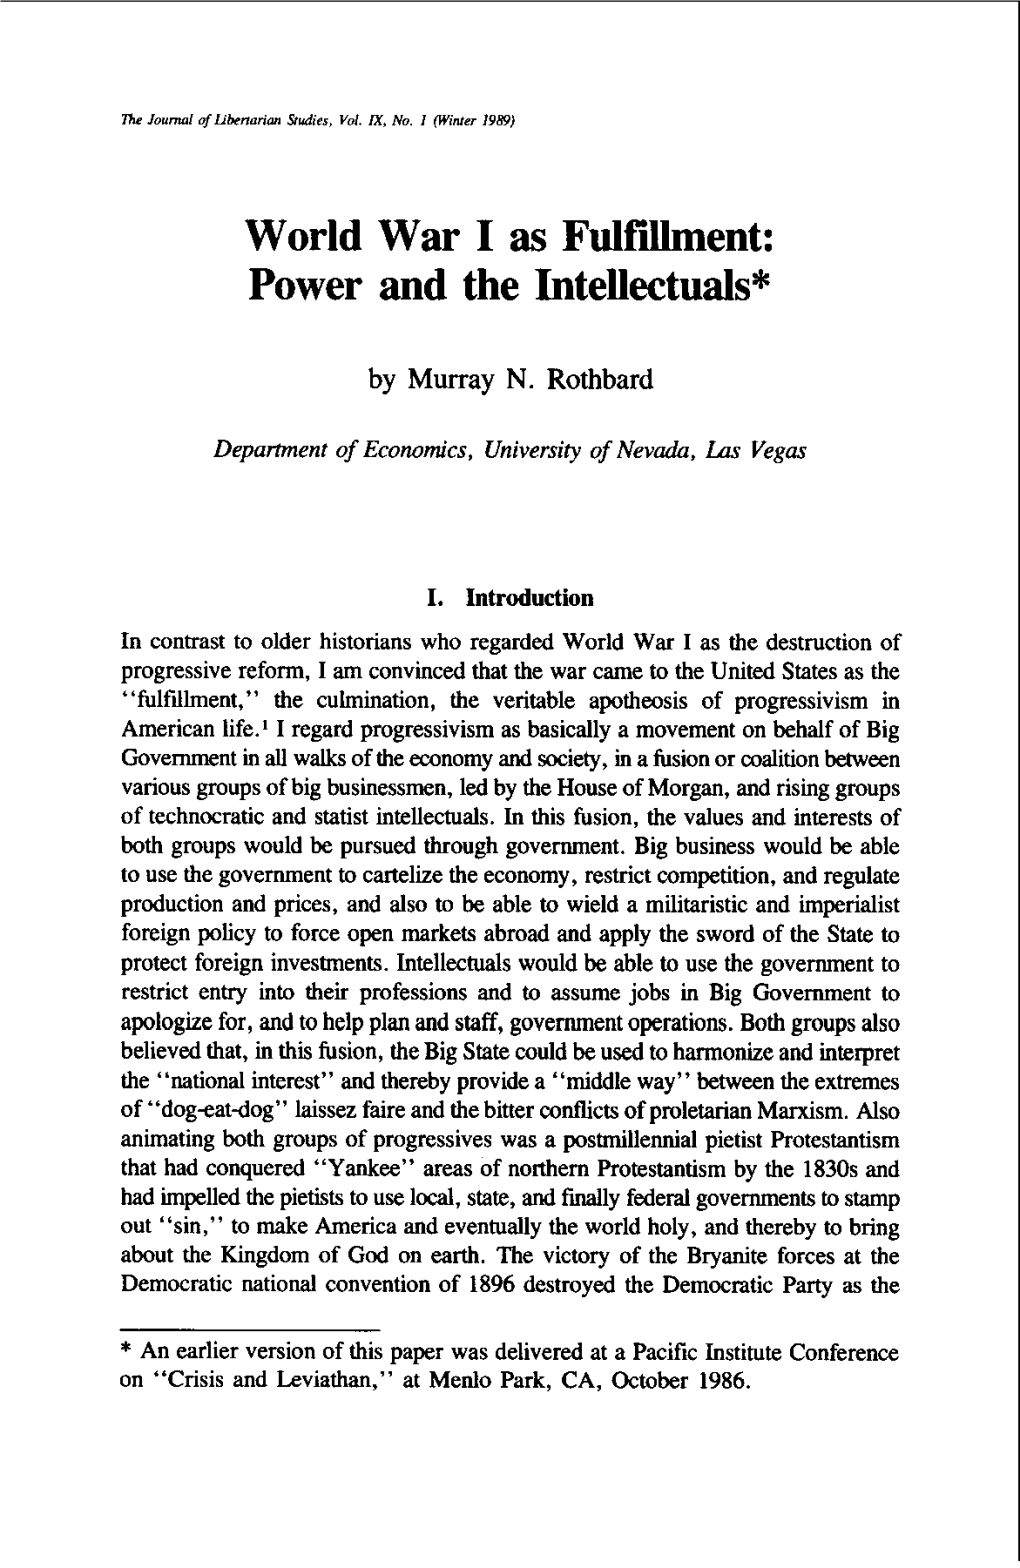 World War I As Fulfillment: Power and the Intellectuals*